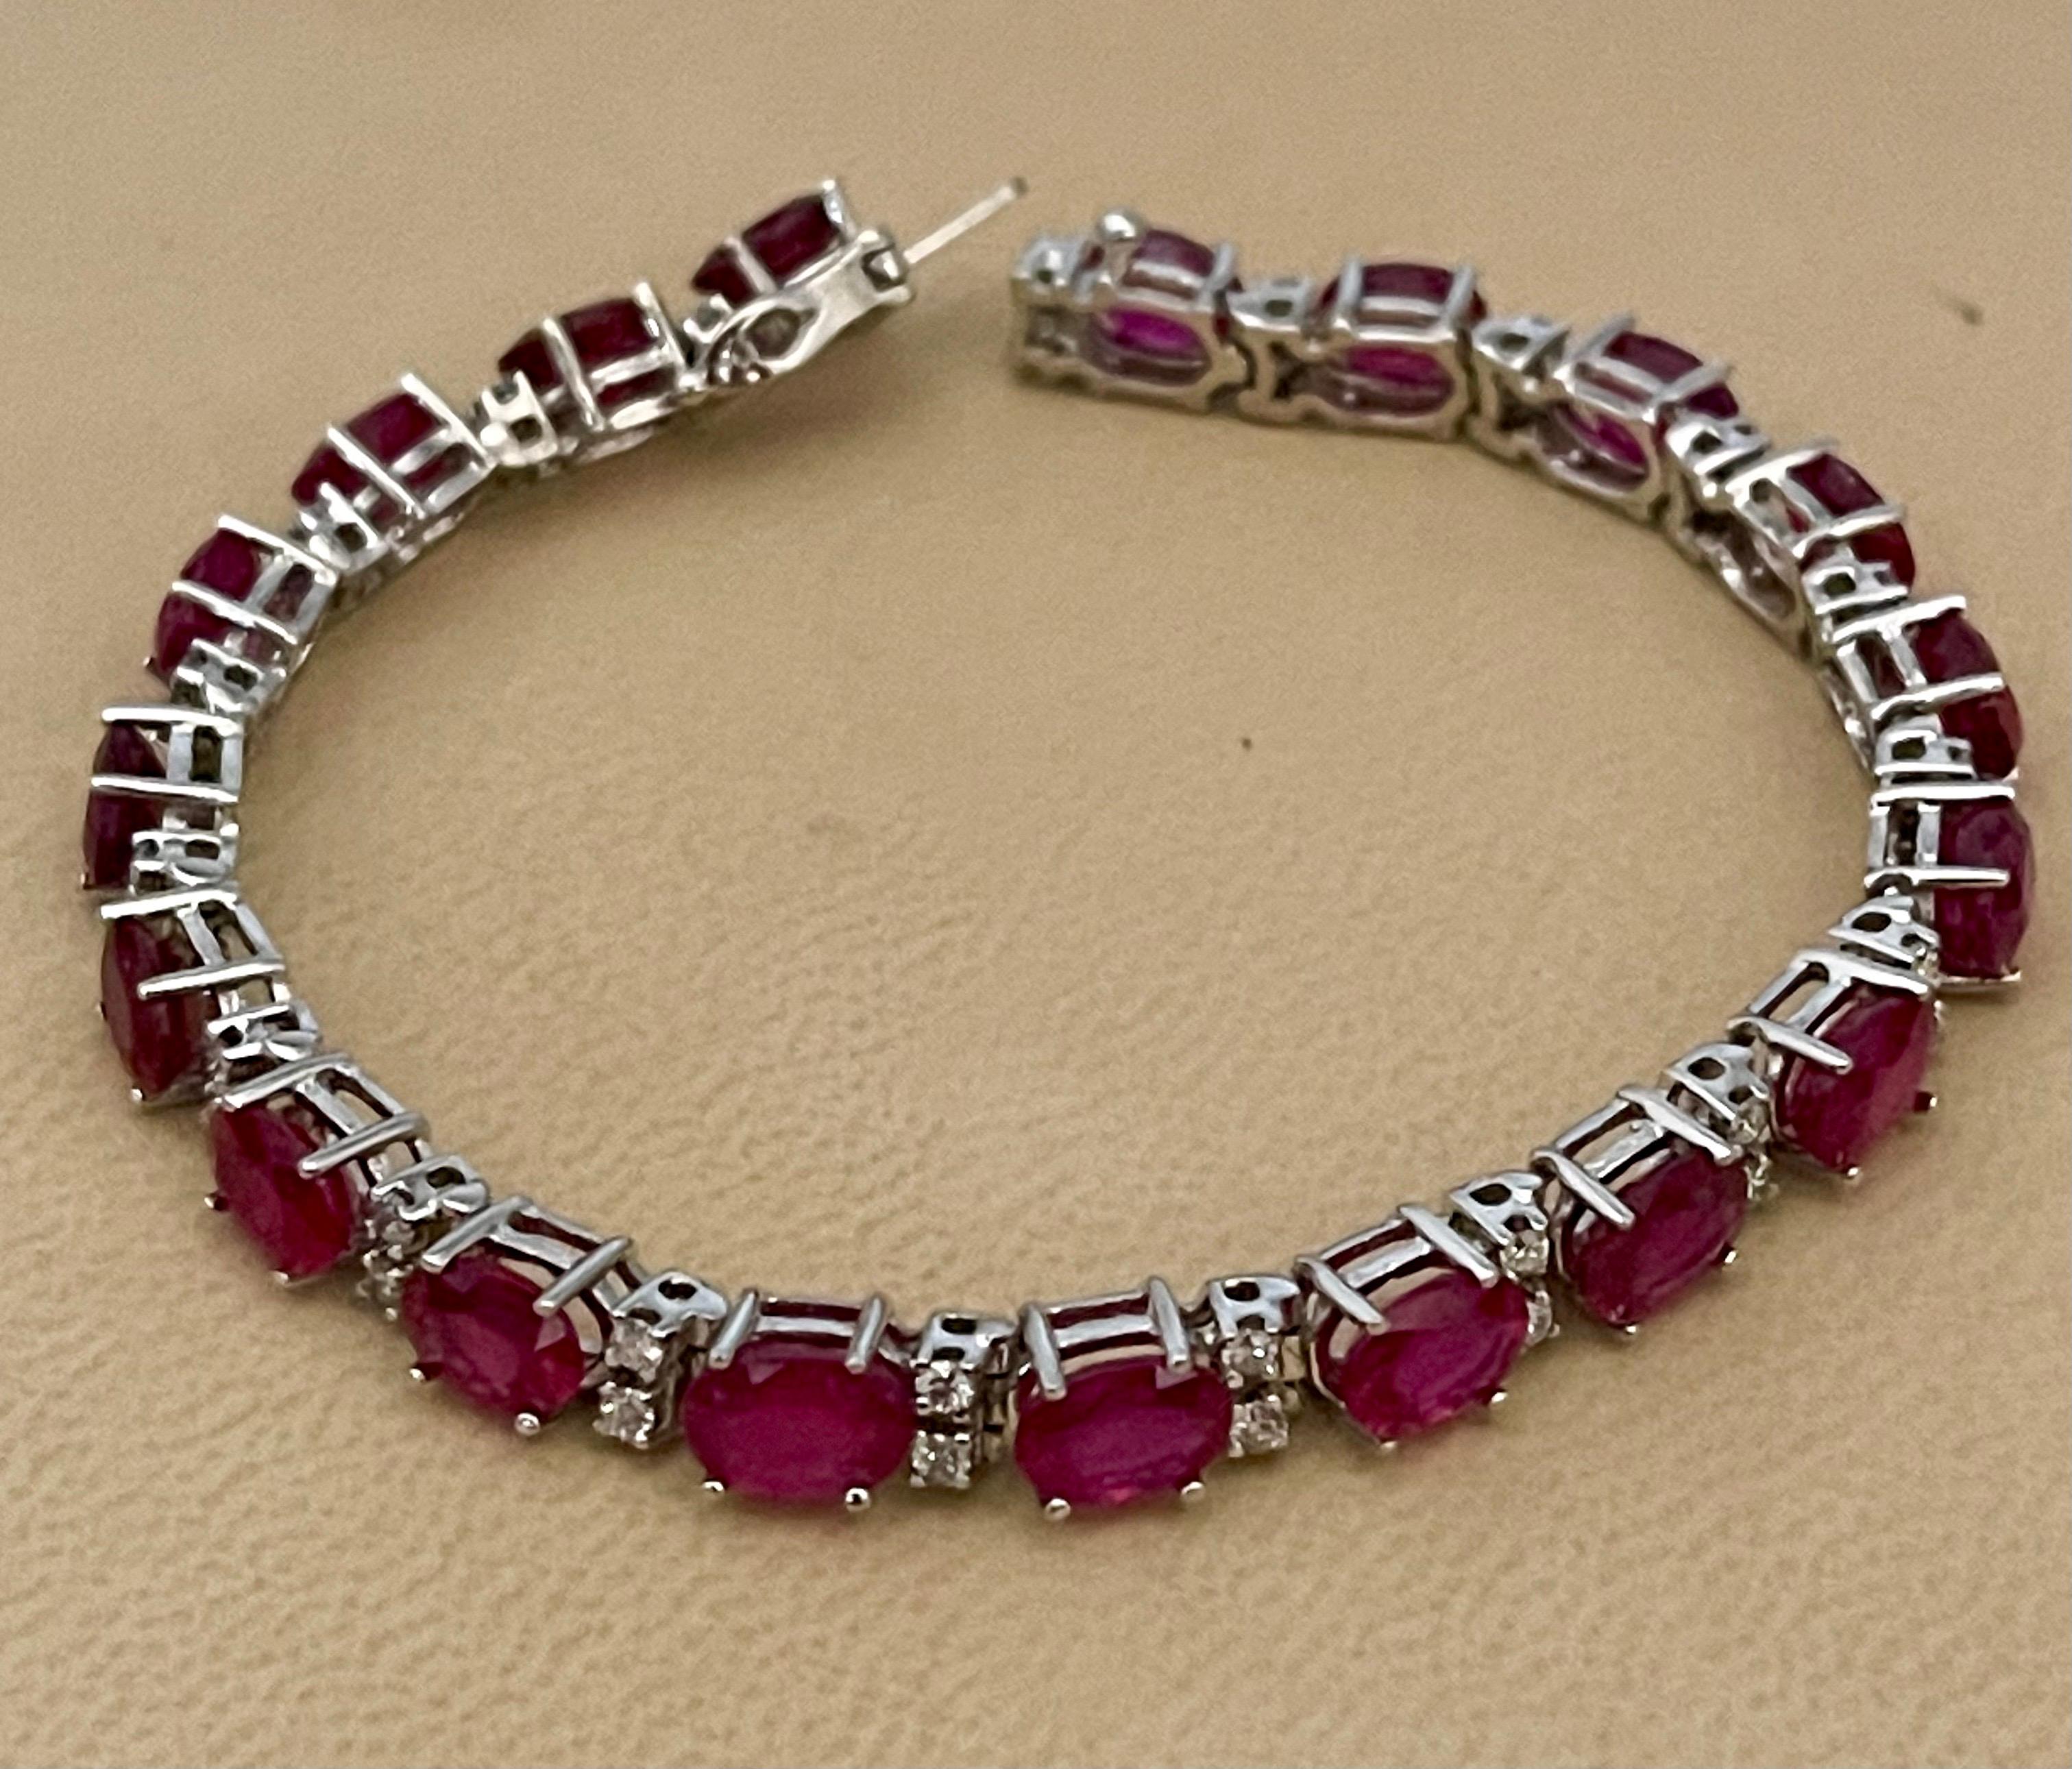 19 Carat Ruby & 1 Carat Diamond Affordable Tennis Bracelet 14 Karat White Gold In New Condition For Sale In New York, NY